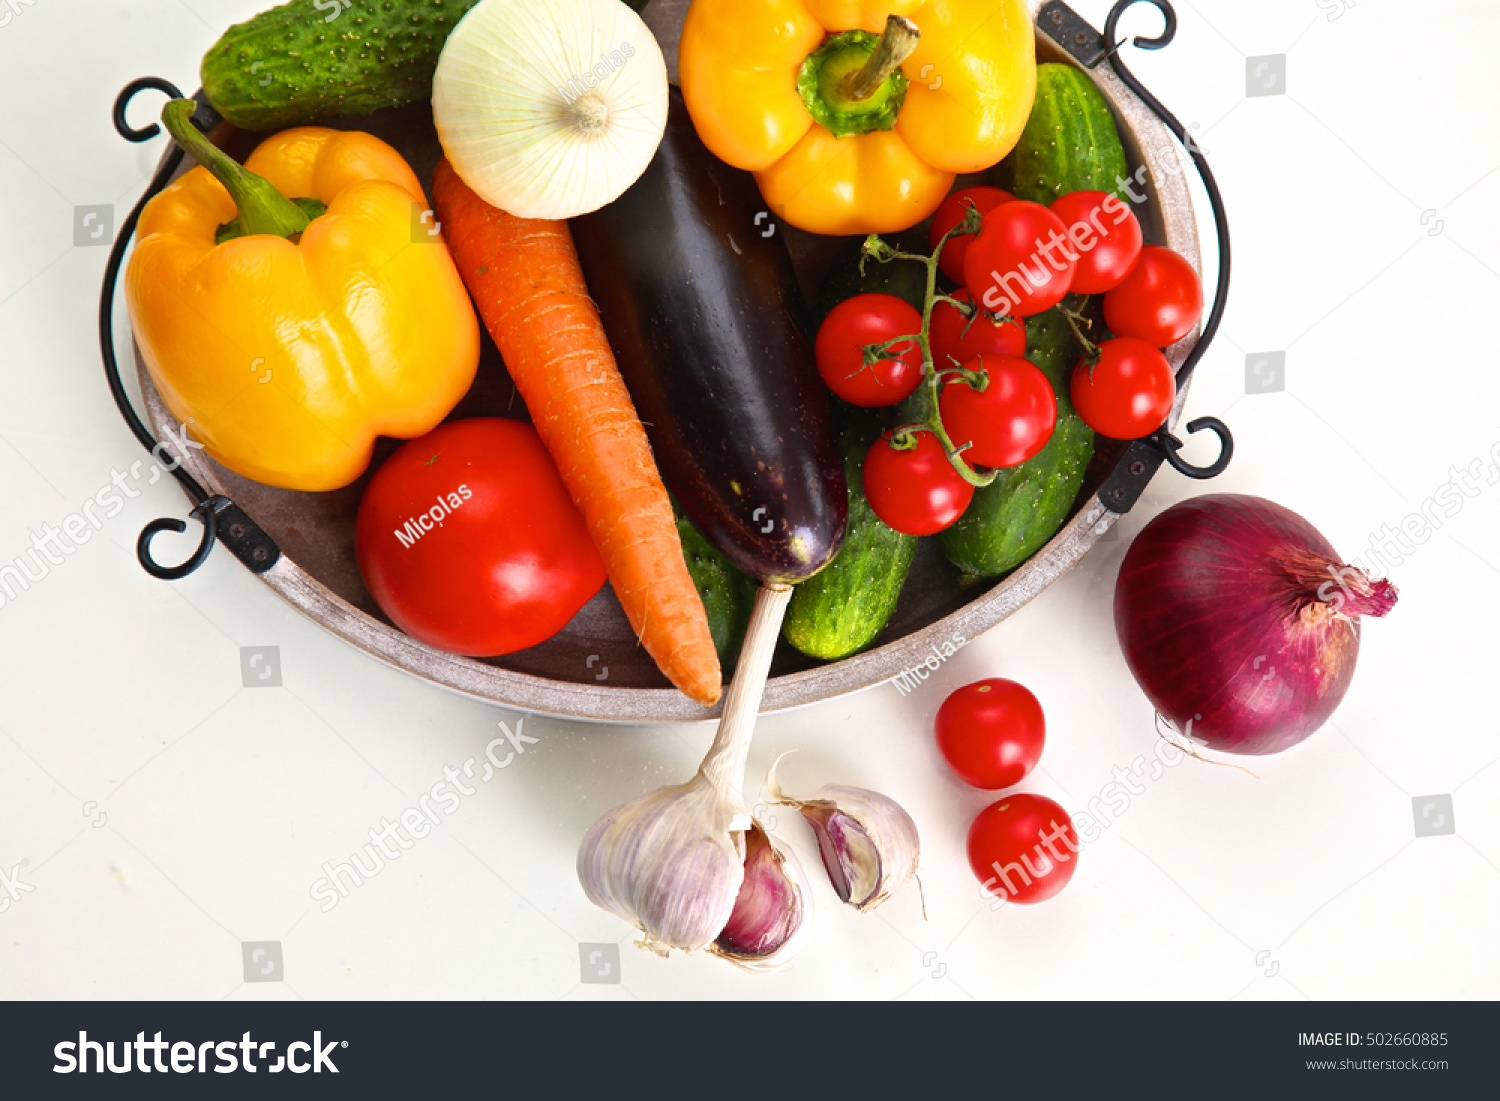 Pile of organic vegetables on a rustic wooden table #502660885